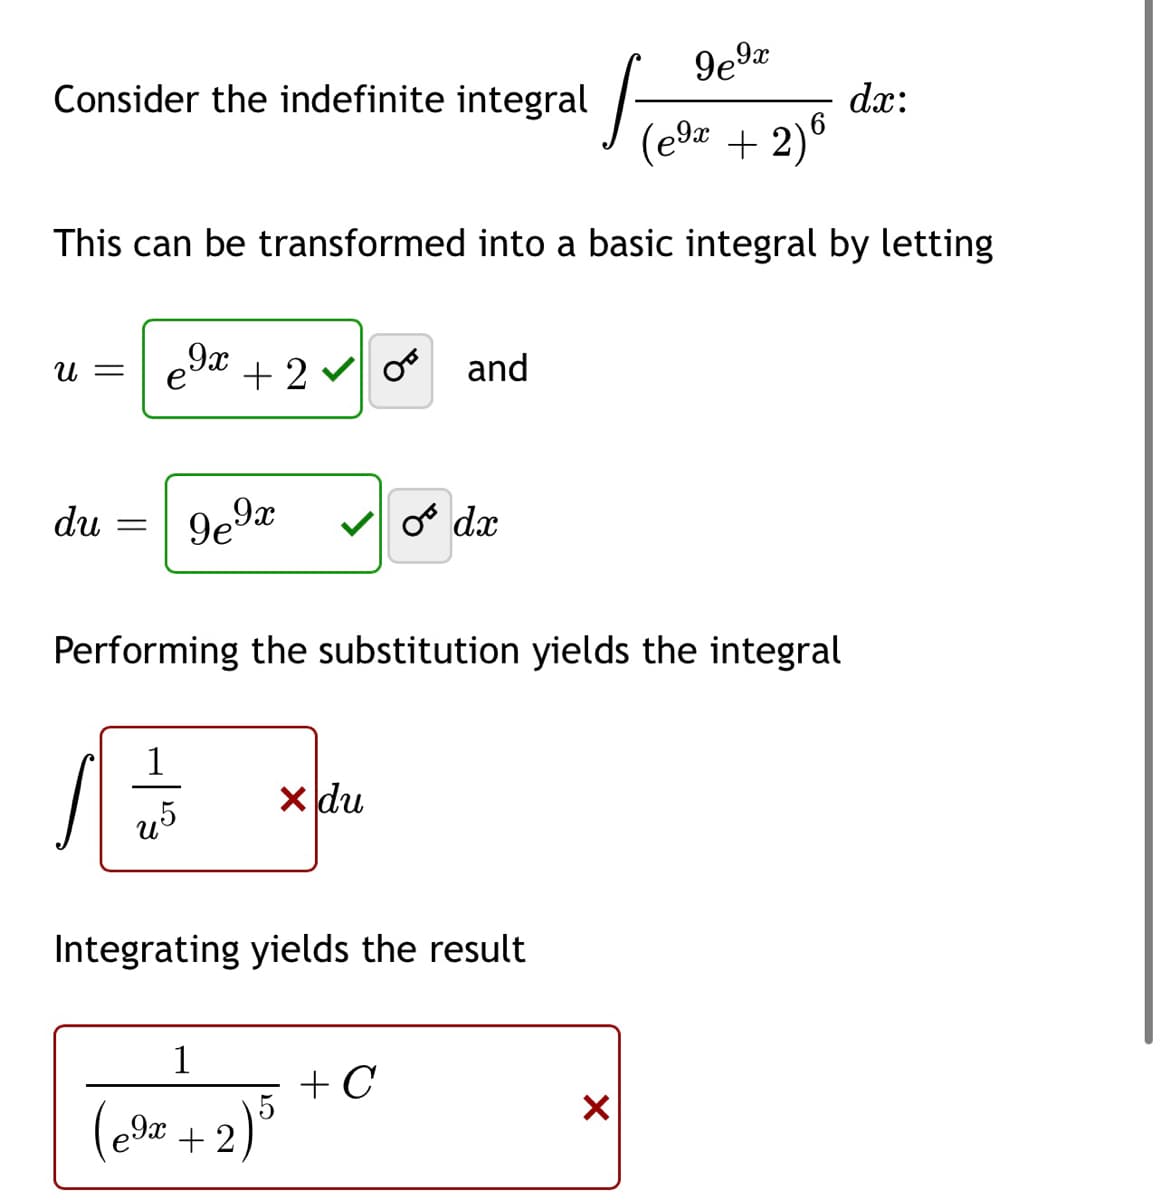 9e9x
Consider the indefinite integral
dx:
(e9# + 2)®
This can be transformed into a basic integral by letting
9x
U =
+ 2 v o and
du
o dx
Performing the substitution yields the integral
1
X du
u5
Integrating yields the result
1
+ C
(e9= + 2)°
